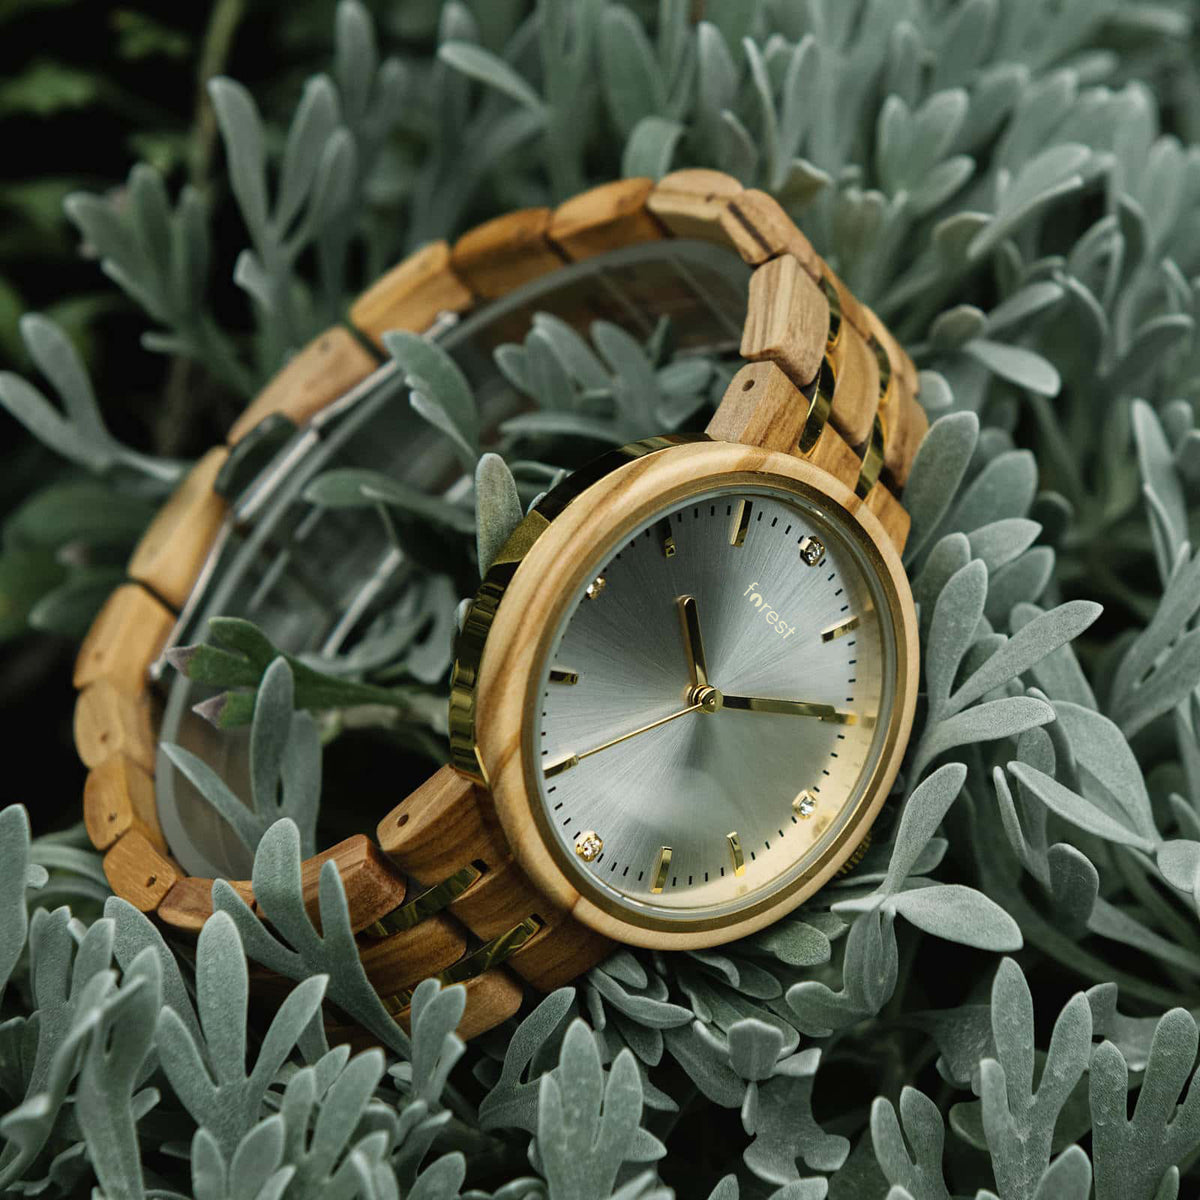 Victoria womans wooden watch photographed in a leafy shrub